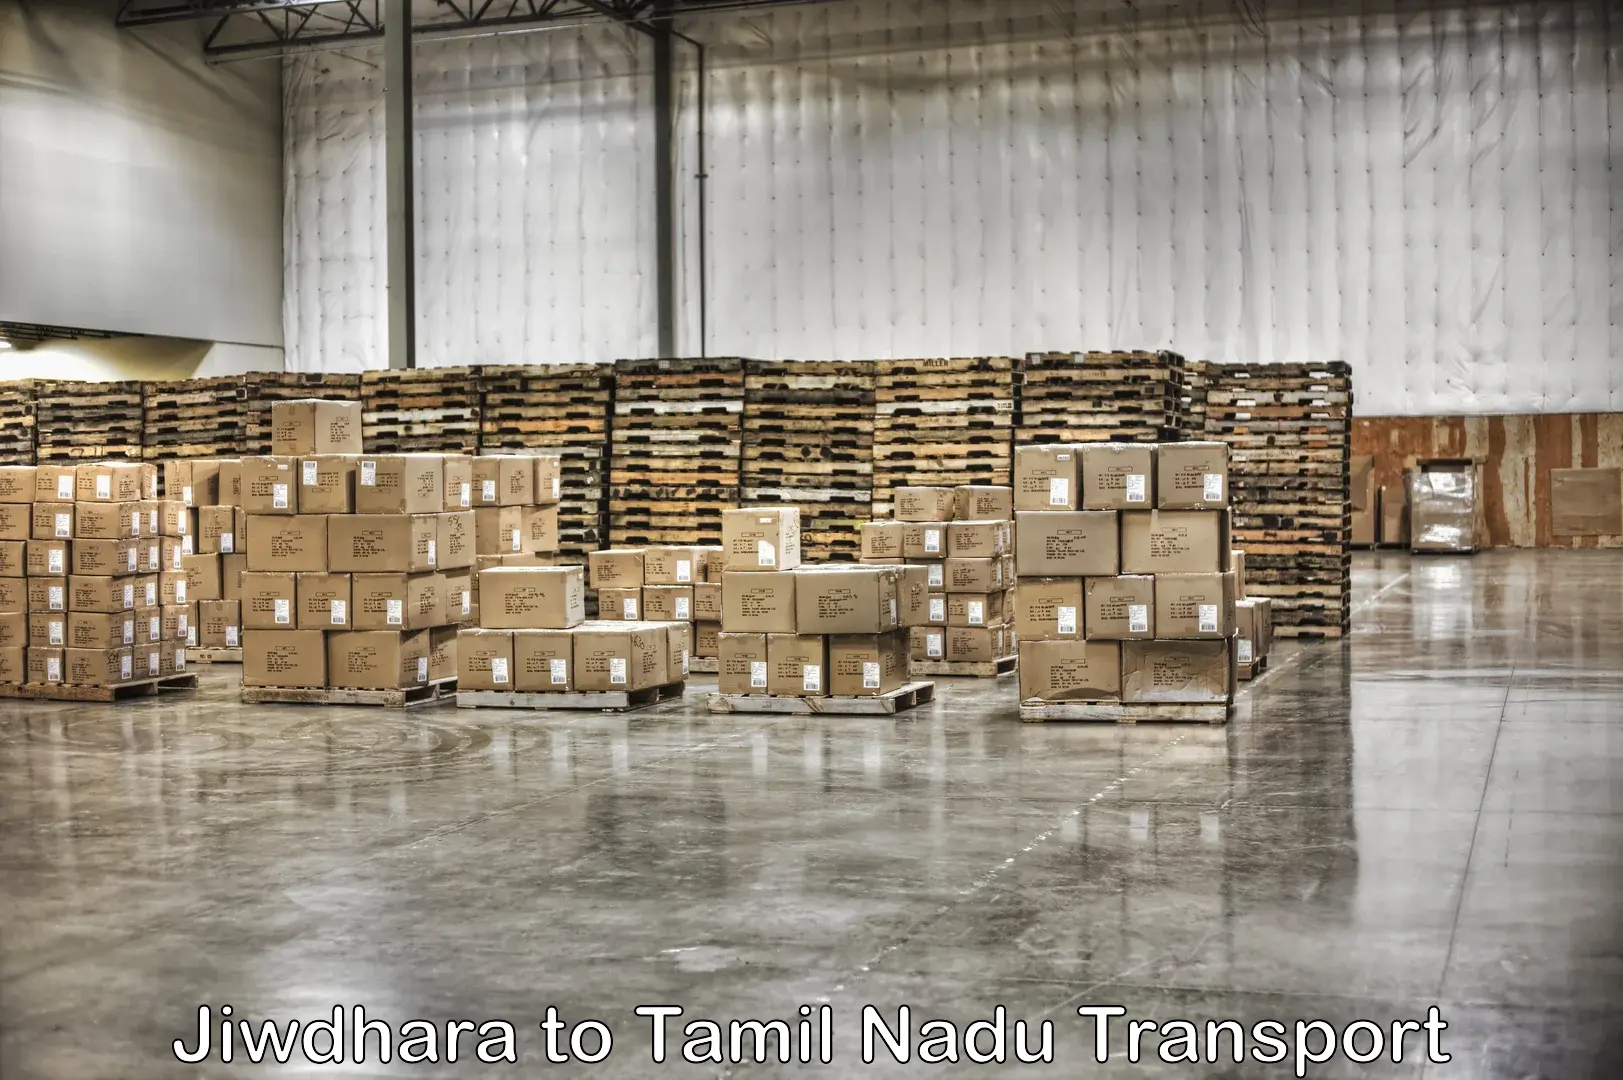 Goods delivery service Jiwdhara to Mylapore